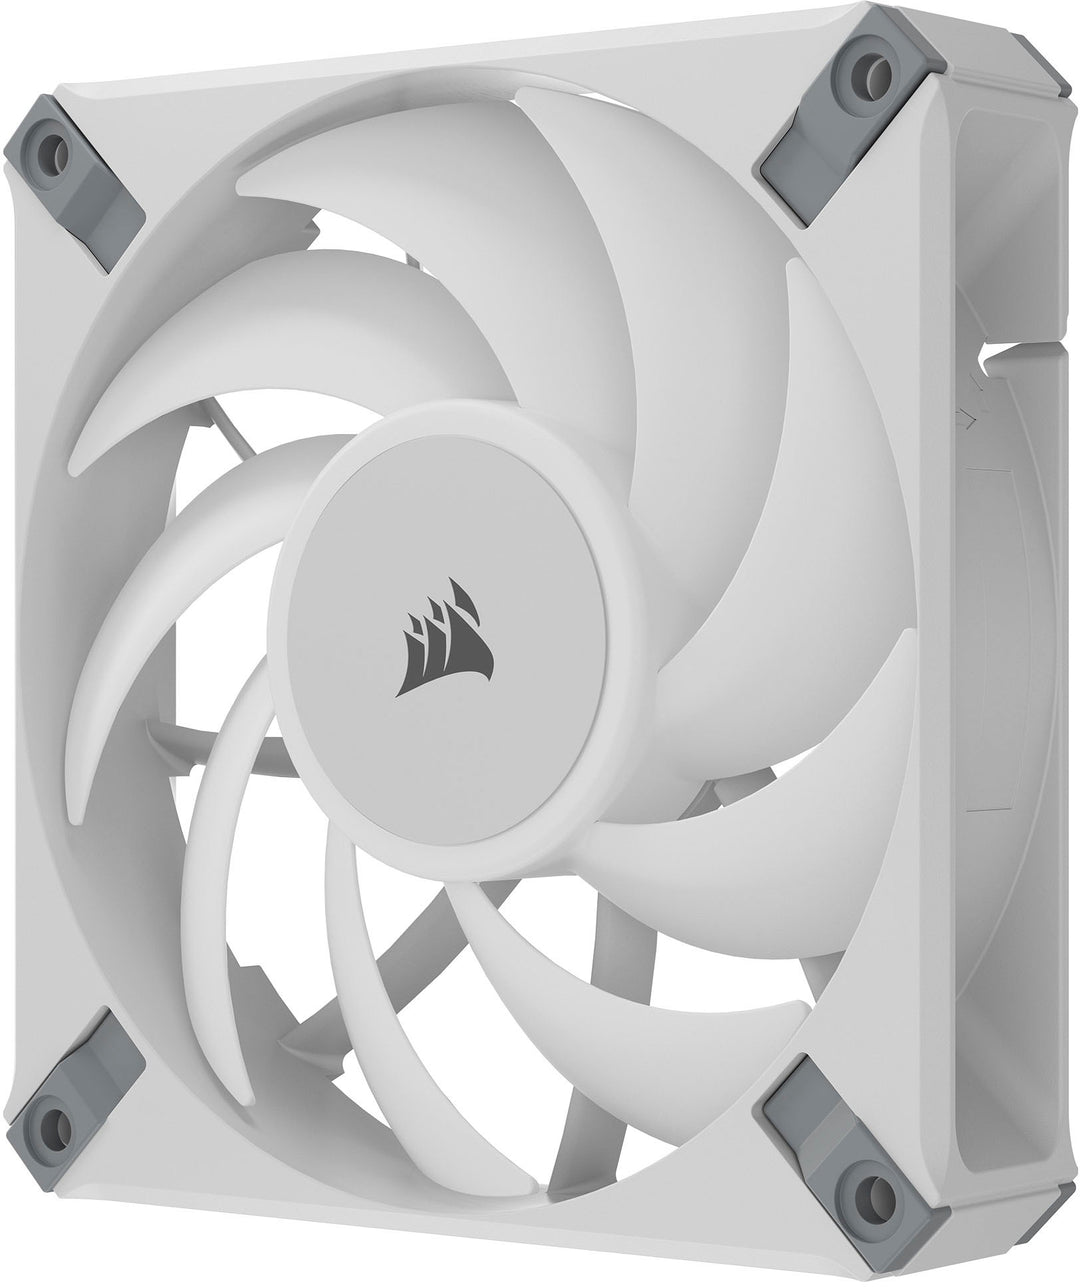 CORSAIR - AF120 RGB ELITE 120mm Fluid Dynamic Bearing Fan with AirGuide Technology - White_5